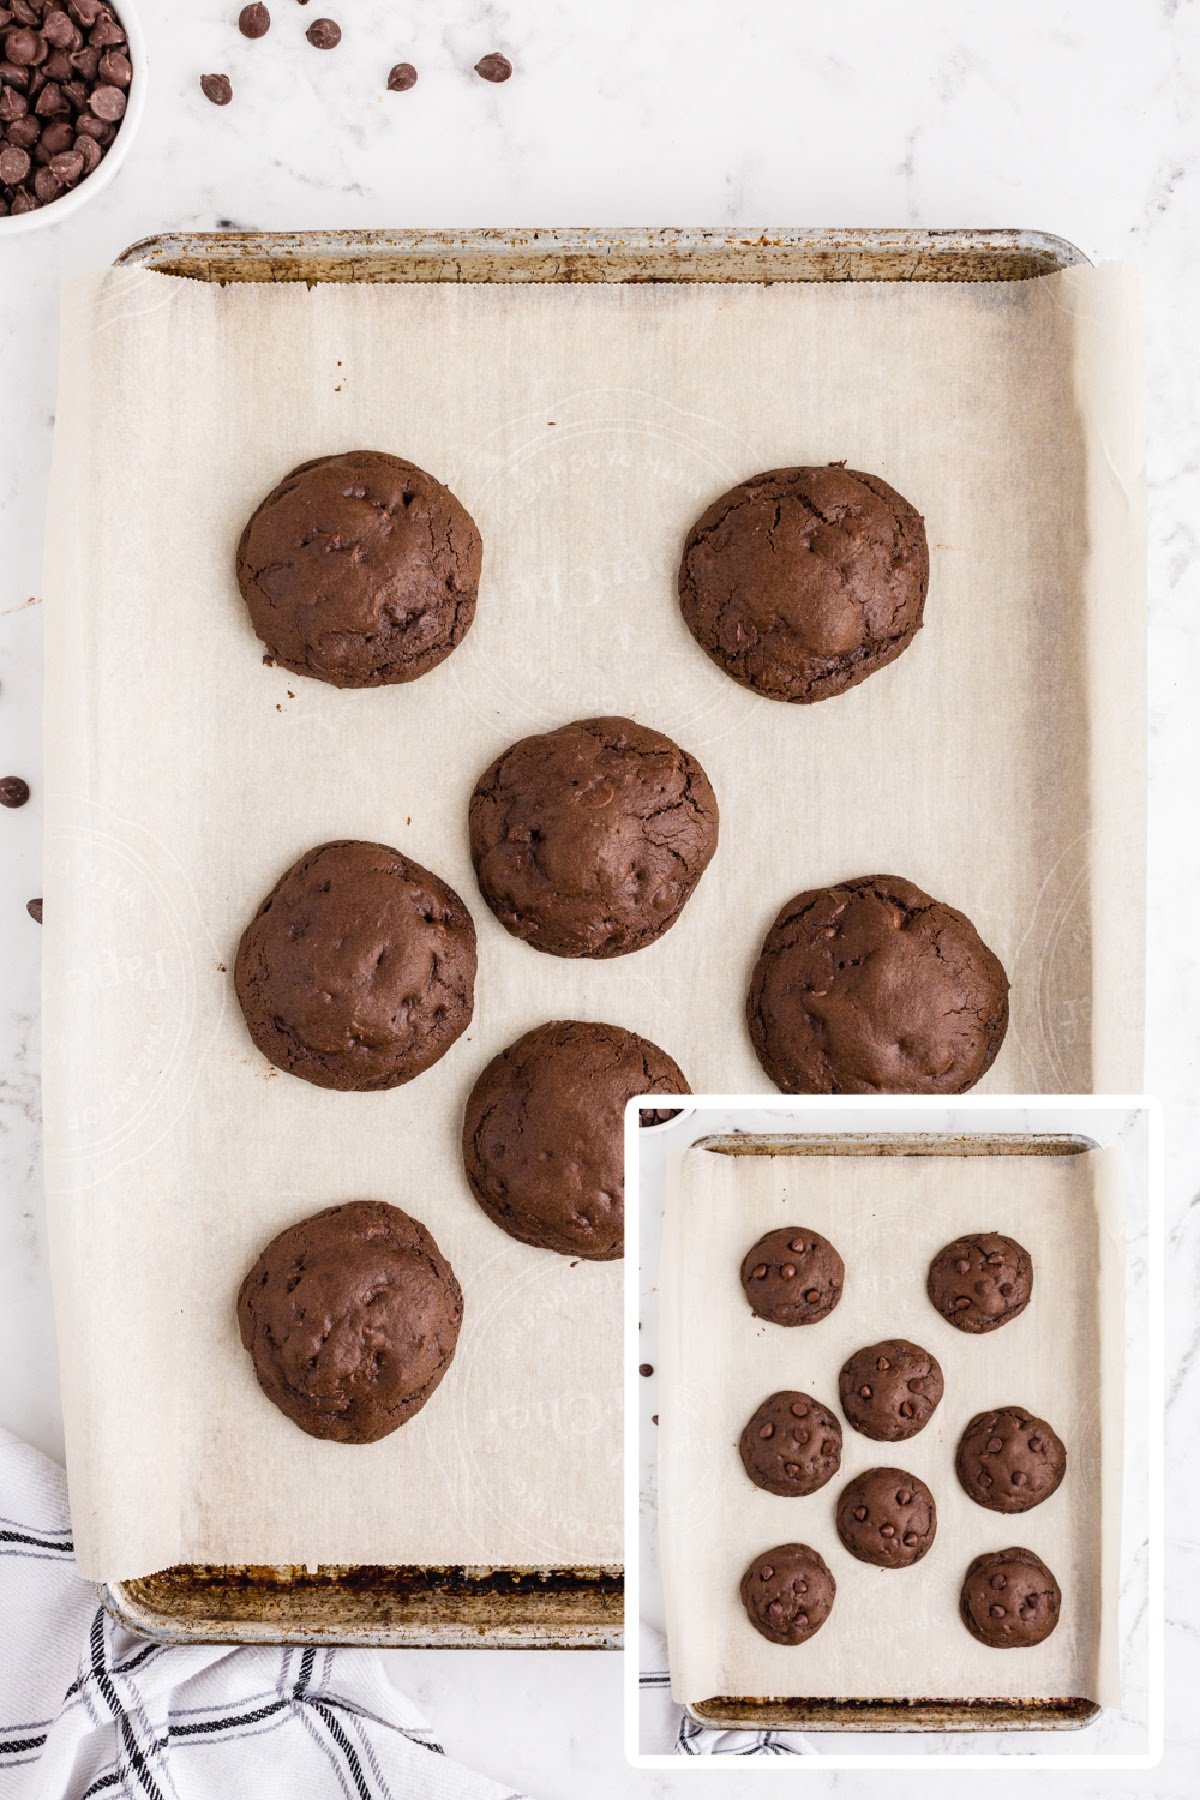 Baked double chocolate chip cookies on sheet pan and inset picture of cookies with decorative chocolate chips pressed into the tops.